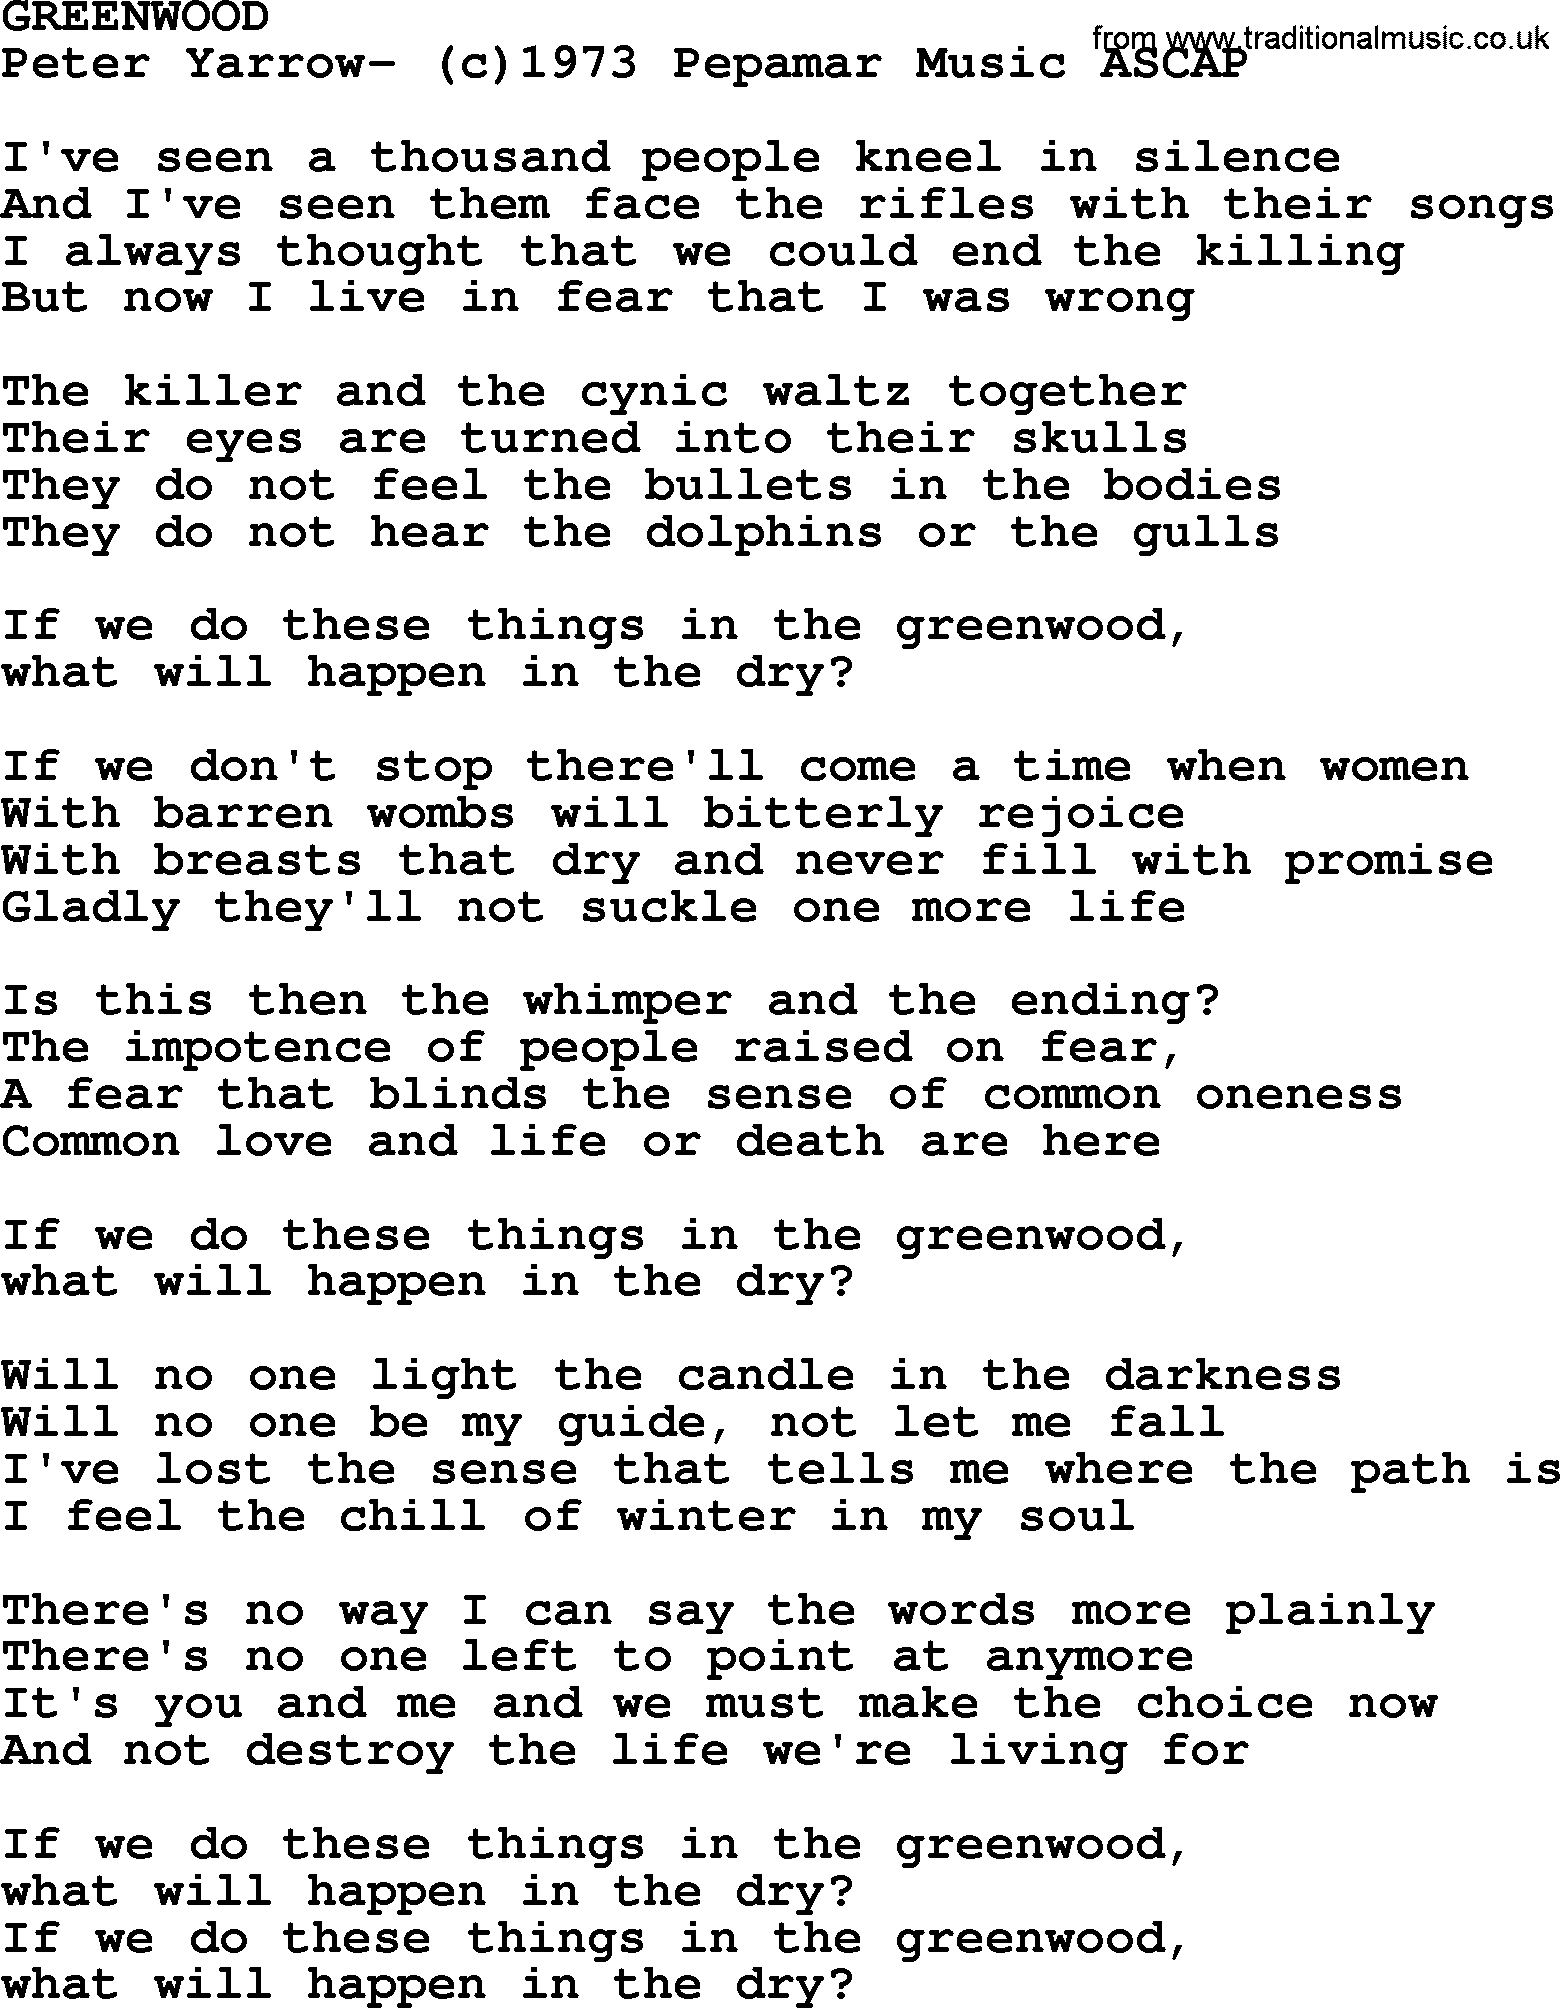 Peter, Paul and Mary song Greenwood lyrics